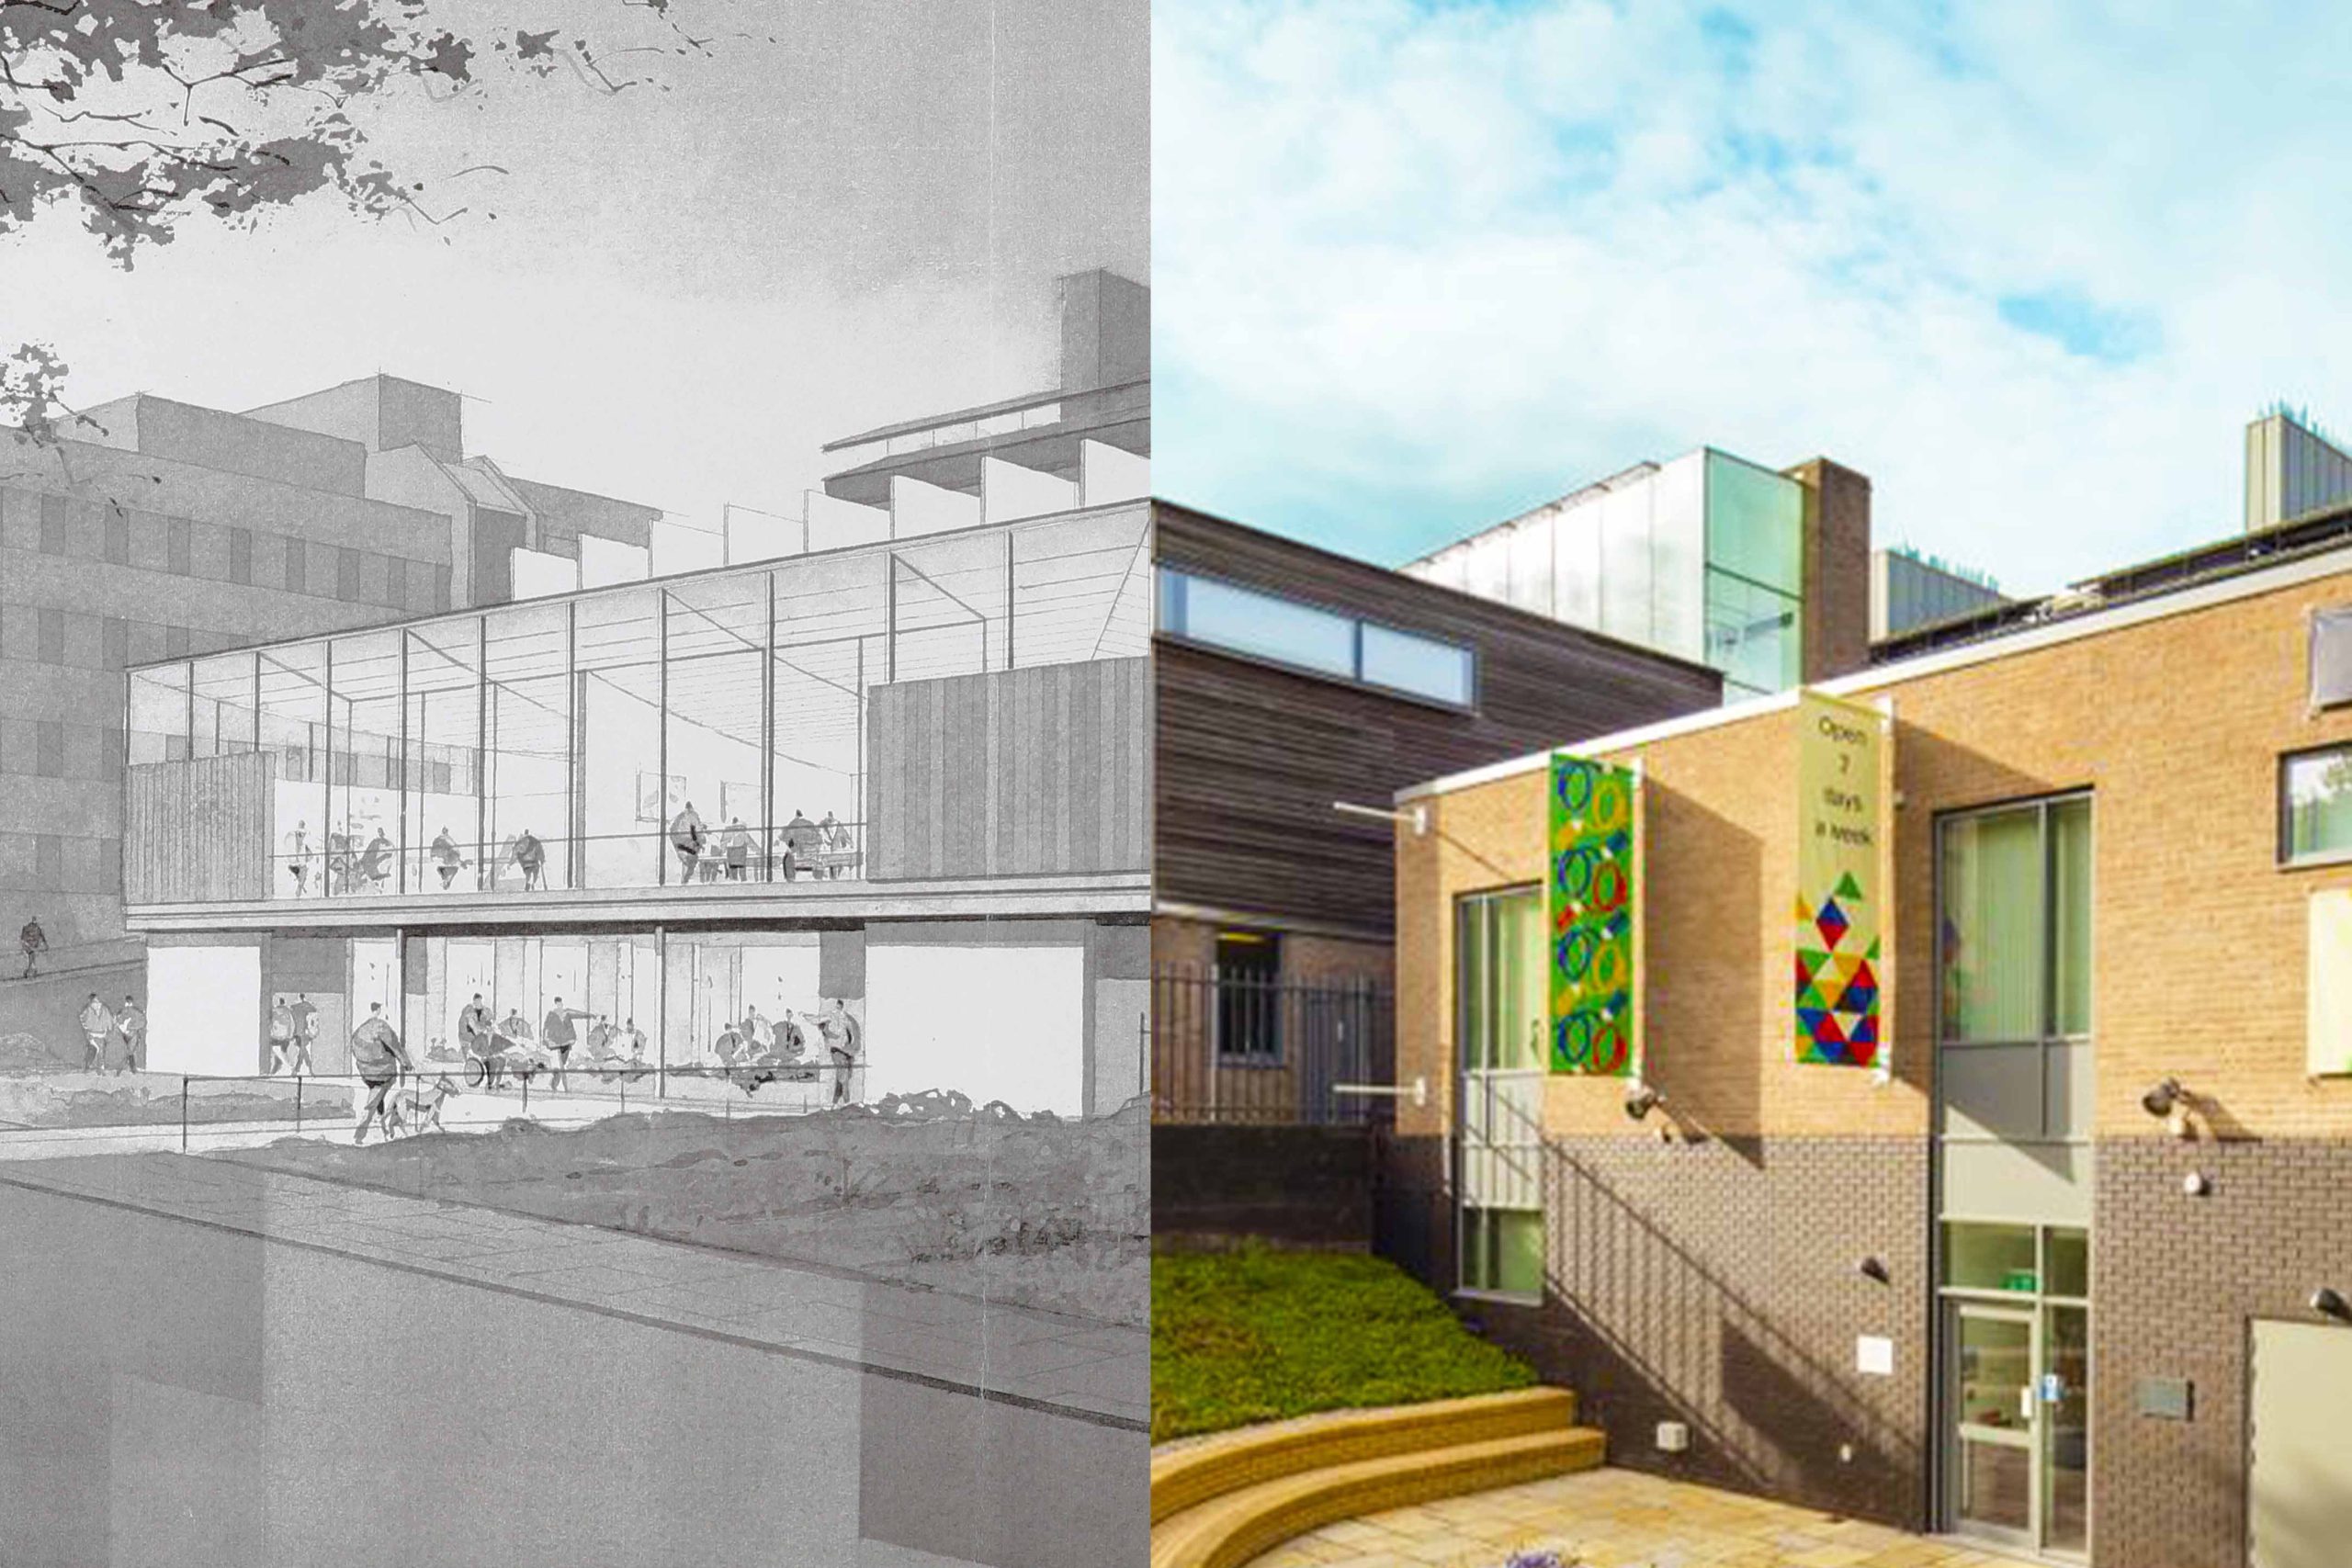 A pencil drawing of Attenborough Arts Centre before it was built next to a photo of it today.